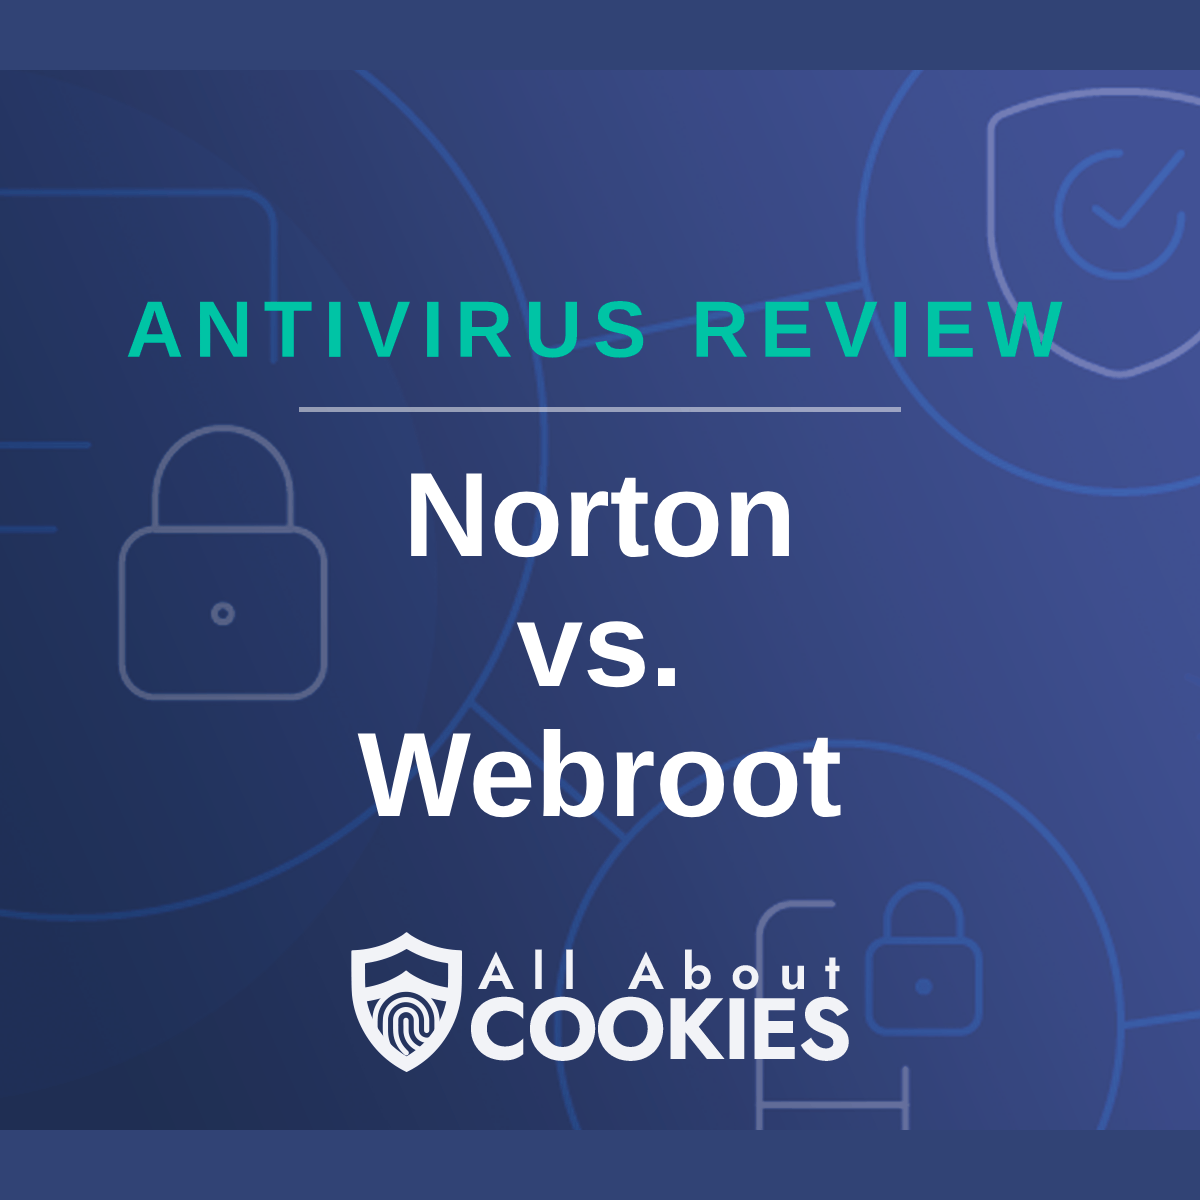 A blue background with images of locks and shields with the text "Norton vs. Webroot" and the All About Cookies logo. 